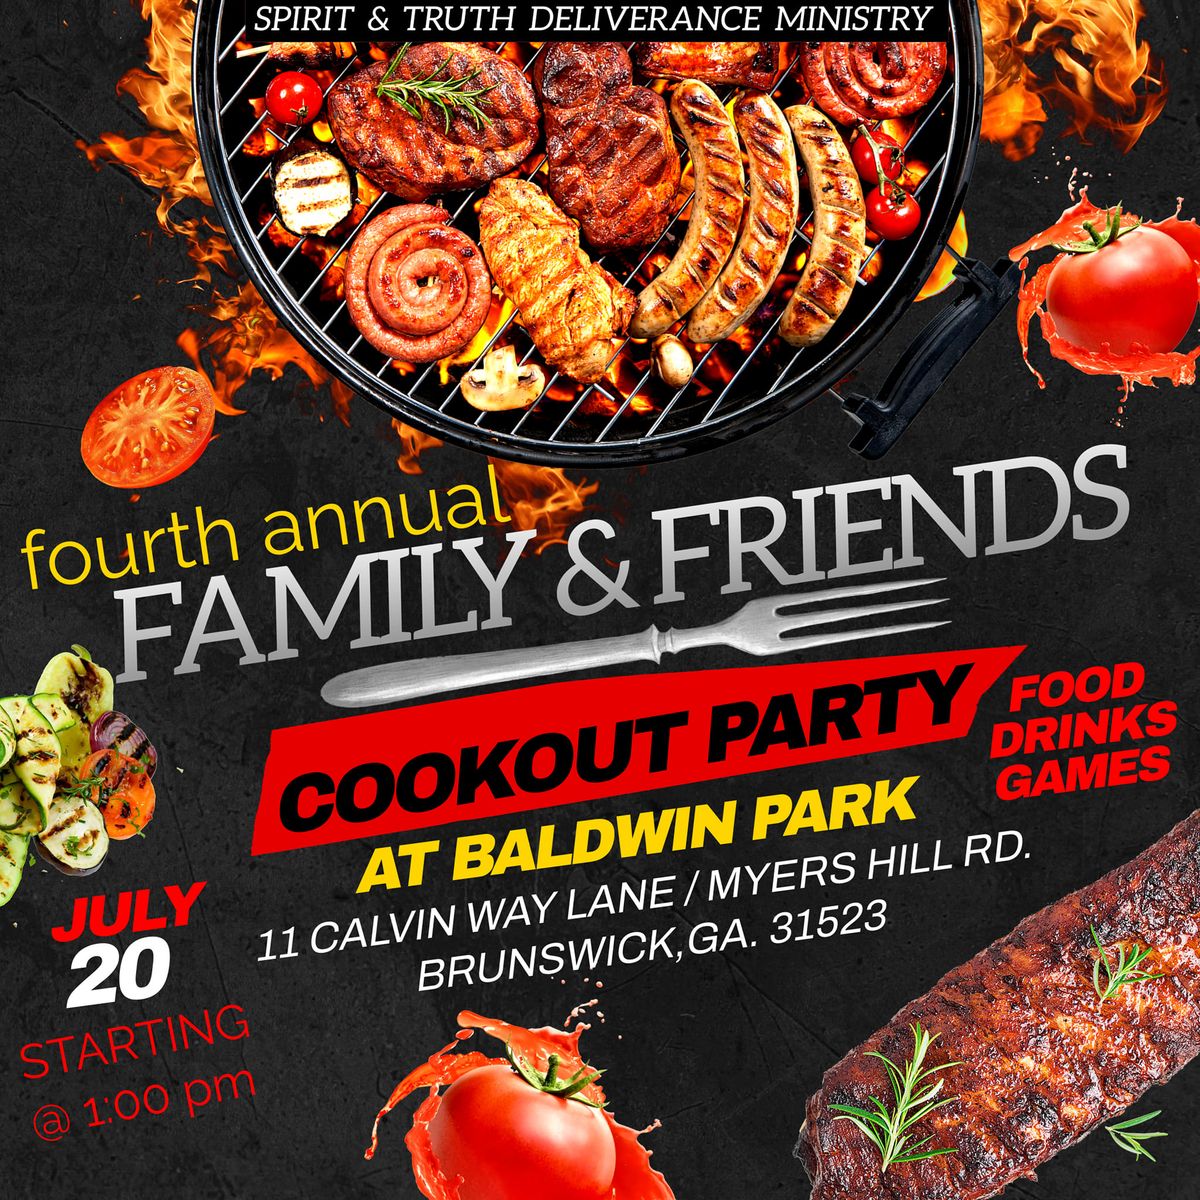 Family & Friends Cookout Party